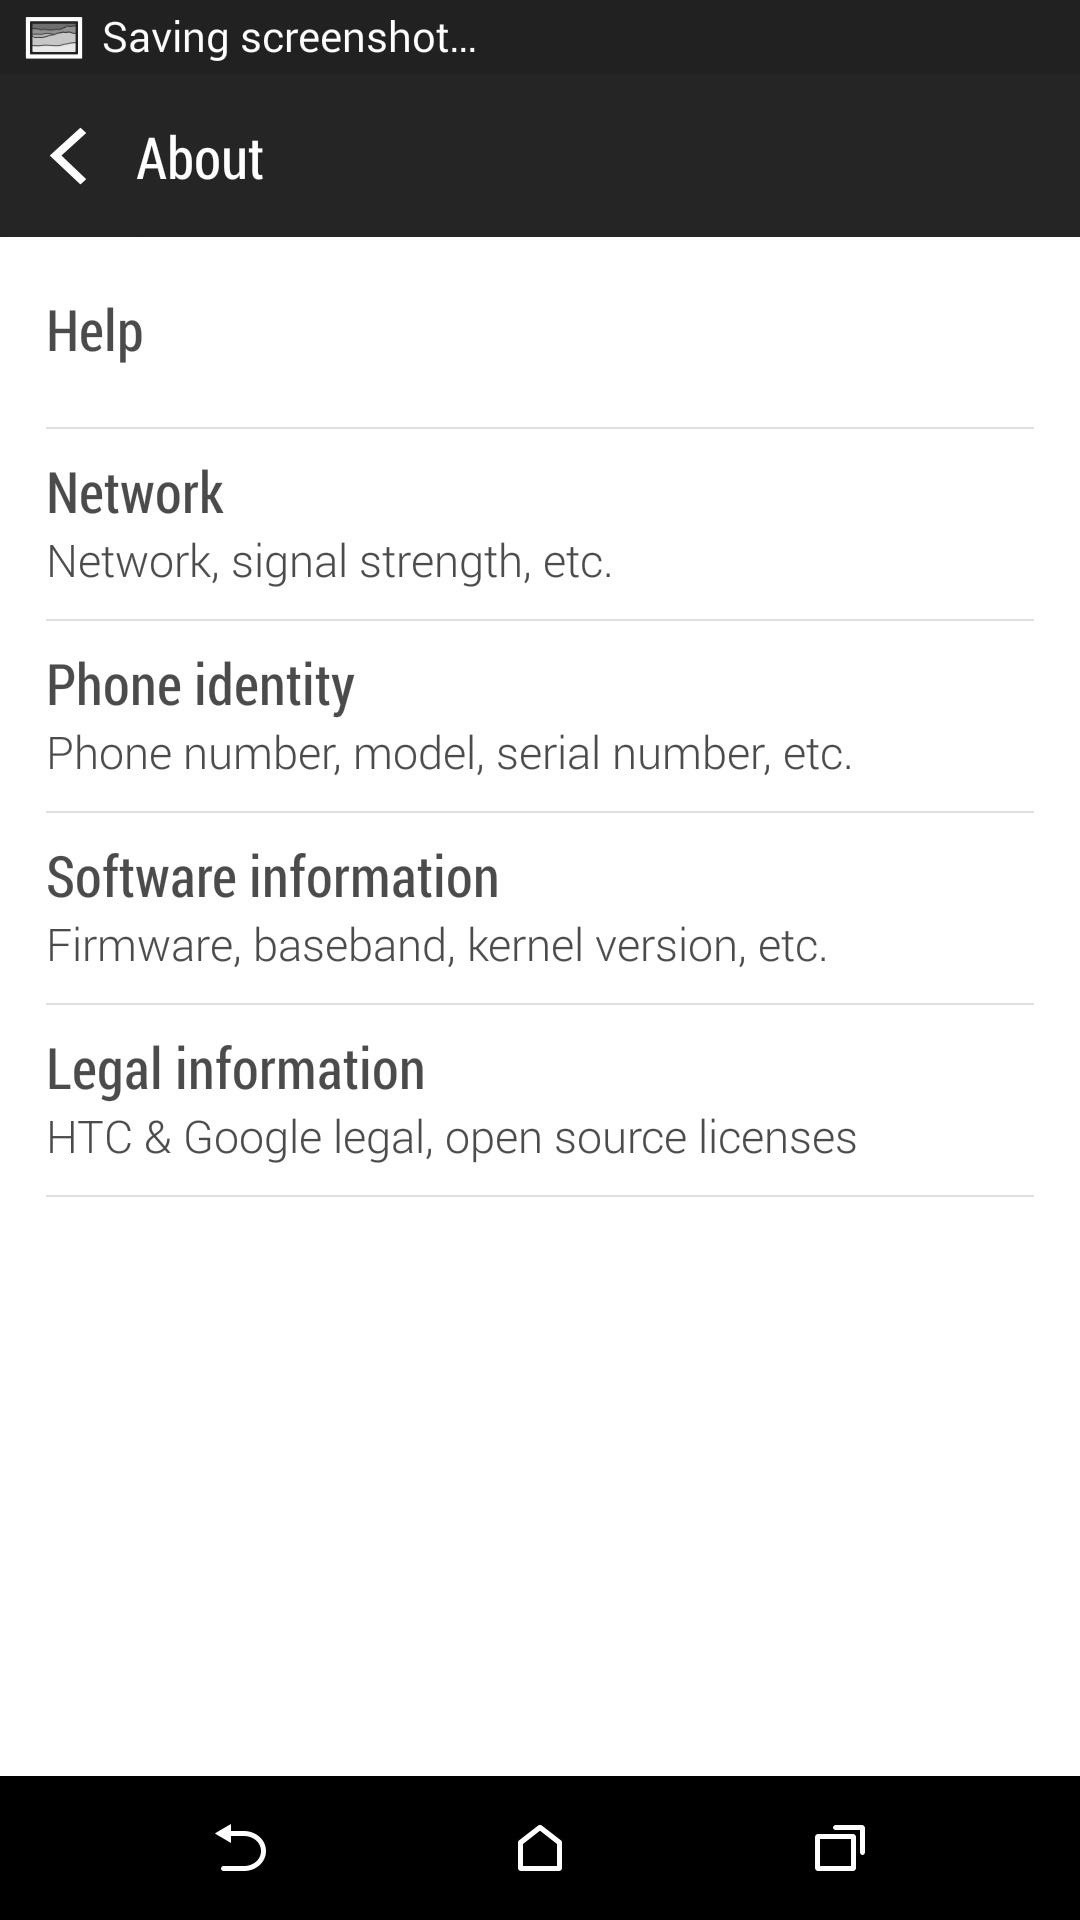 How to Unlock the Hidden Developer Options on Your HTC One M8